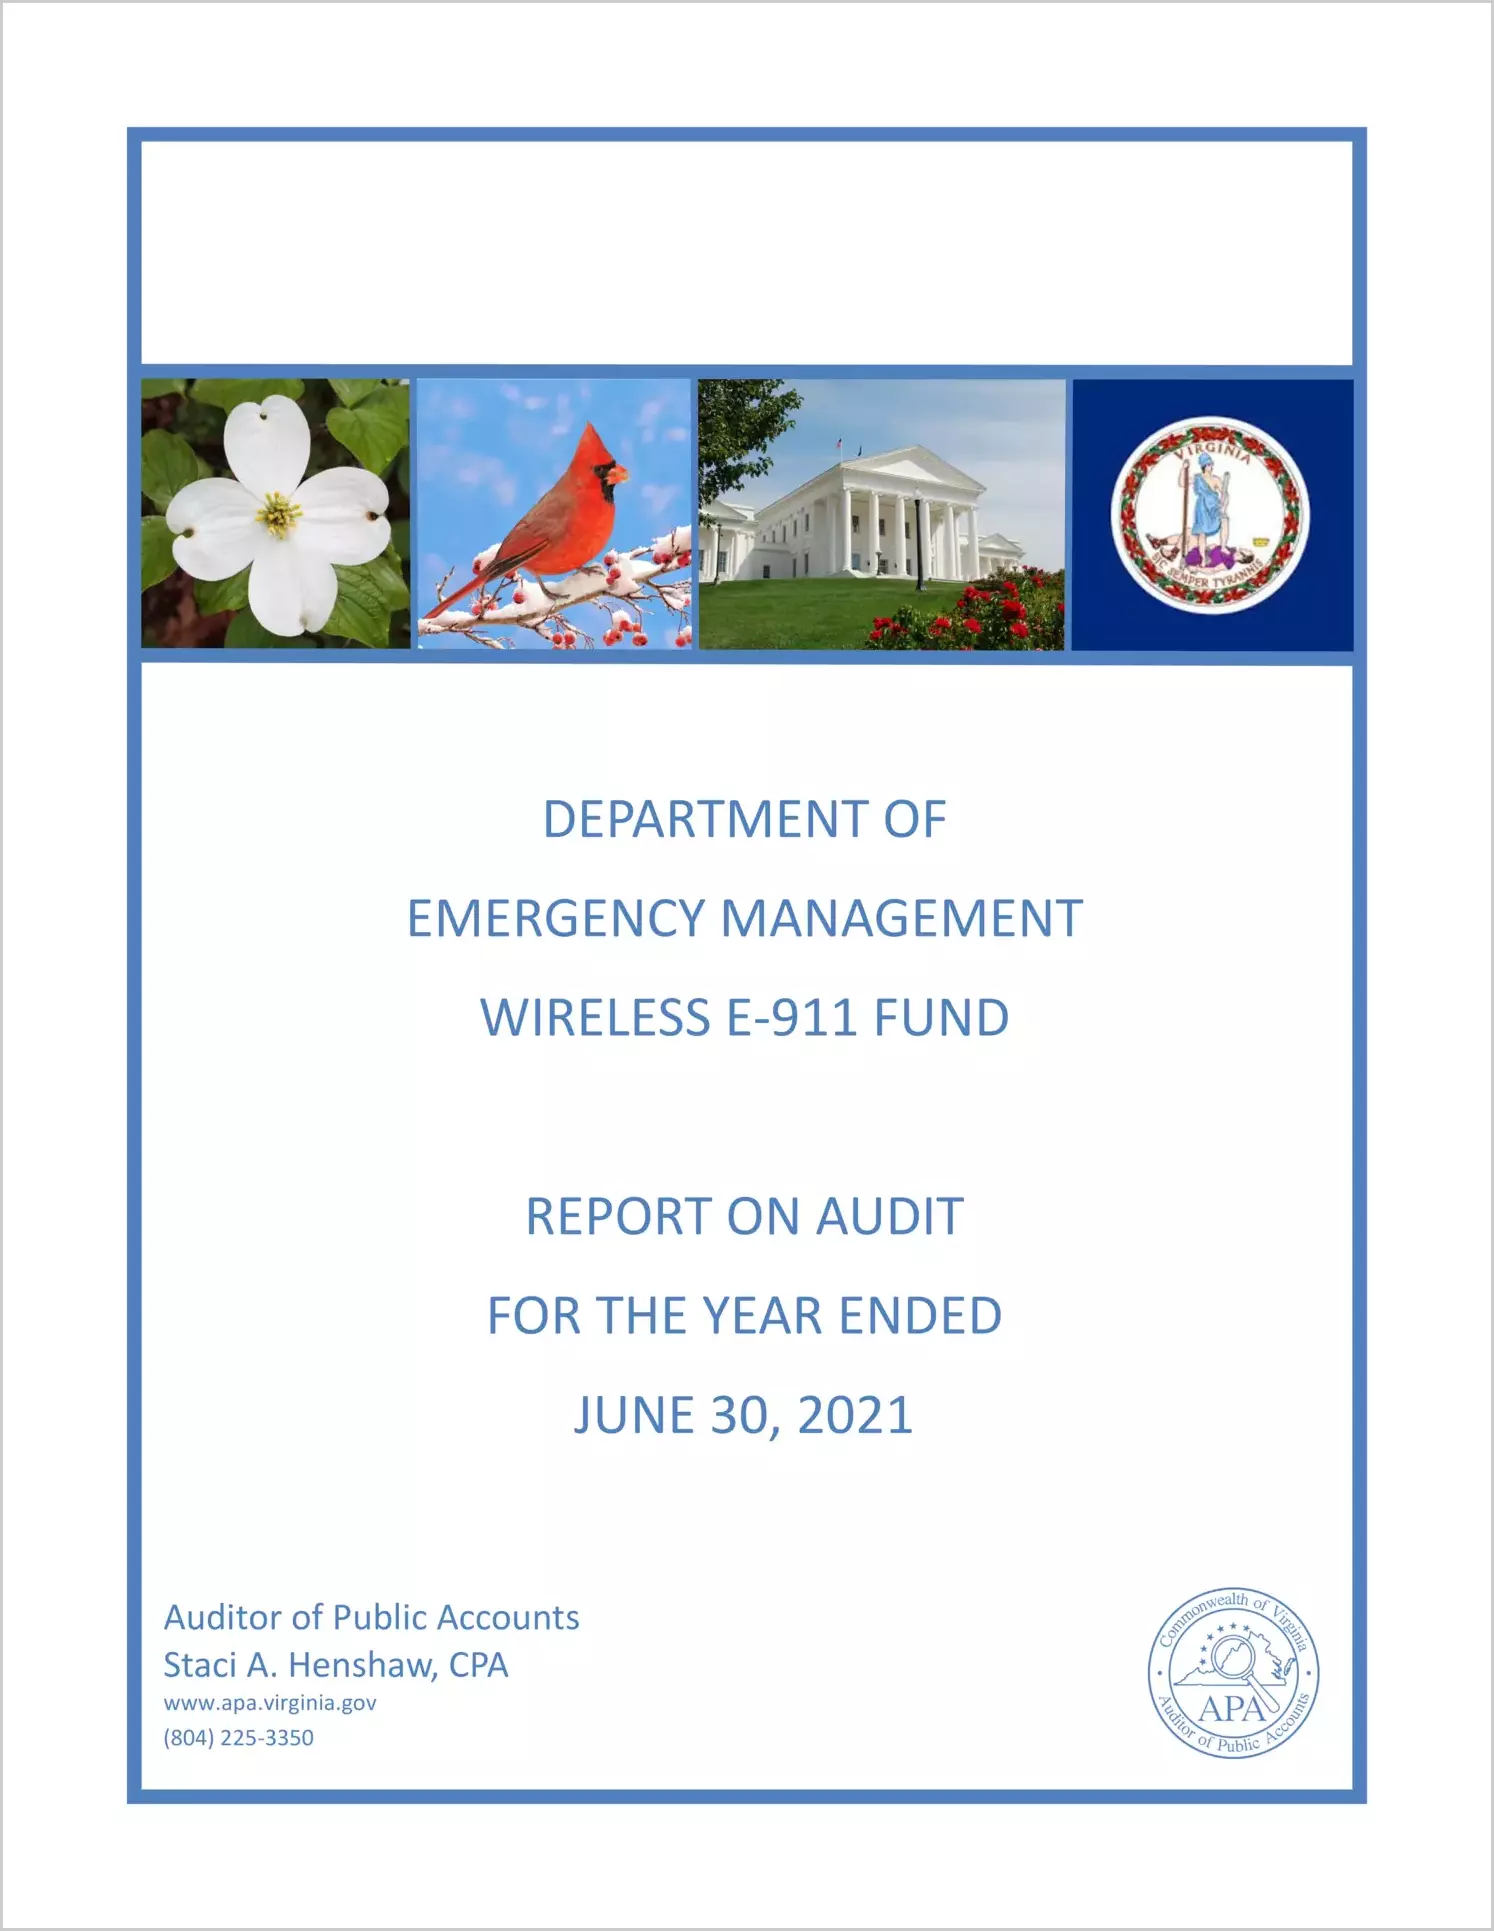 Department of Emergency Management Wireless E-911 Fund for the year ended June 30, 2021